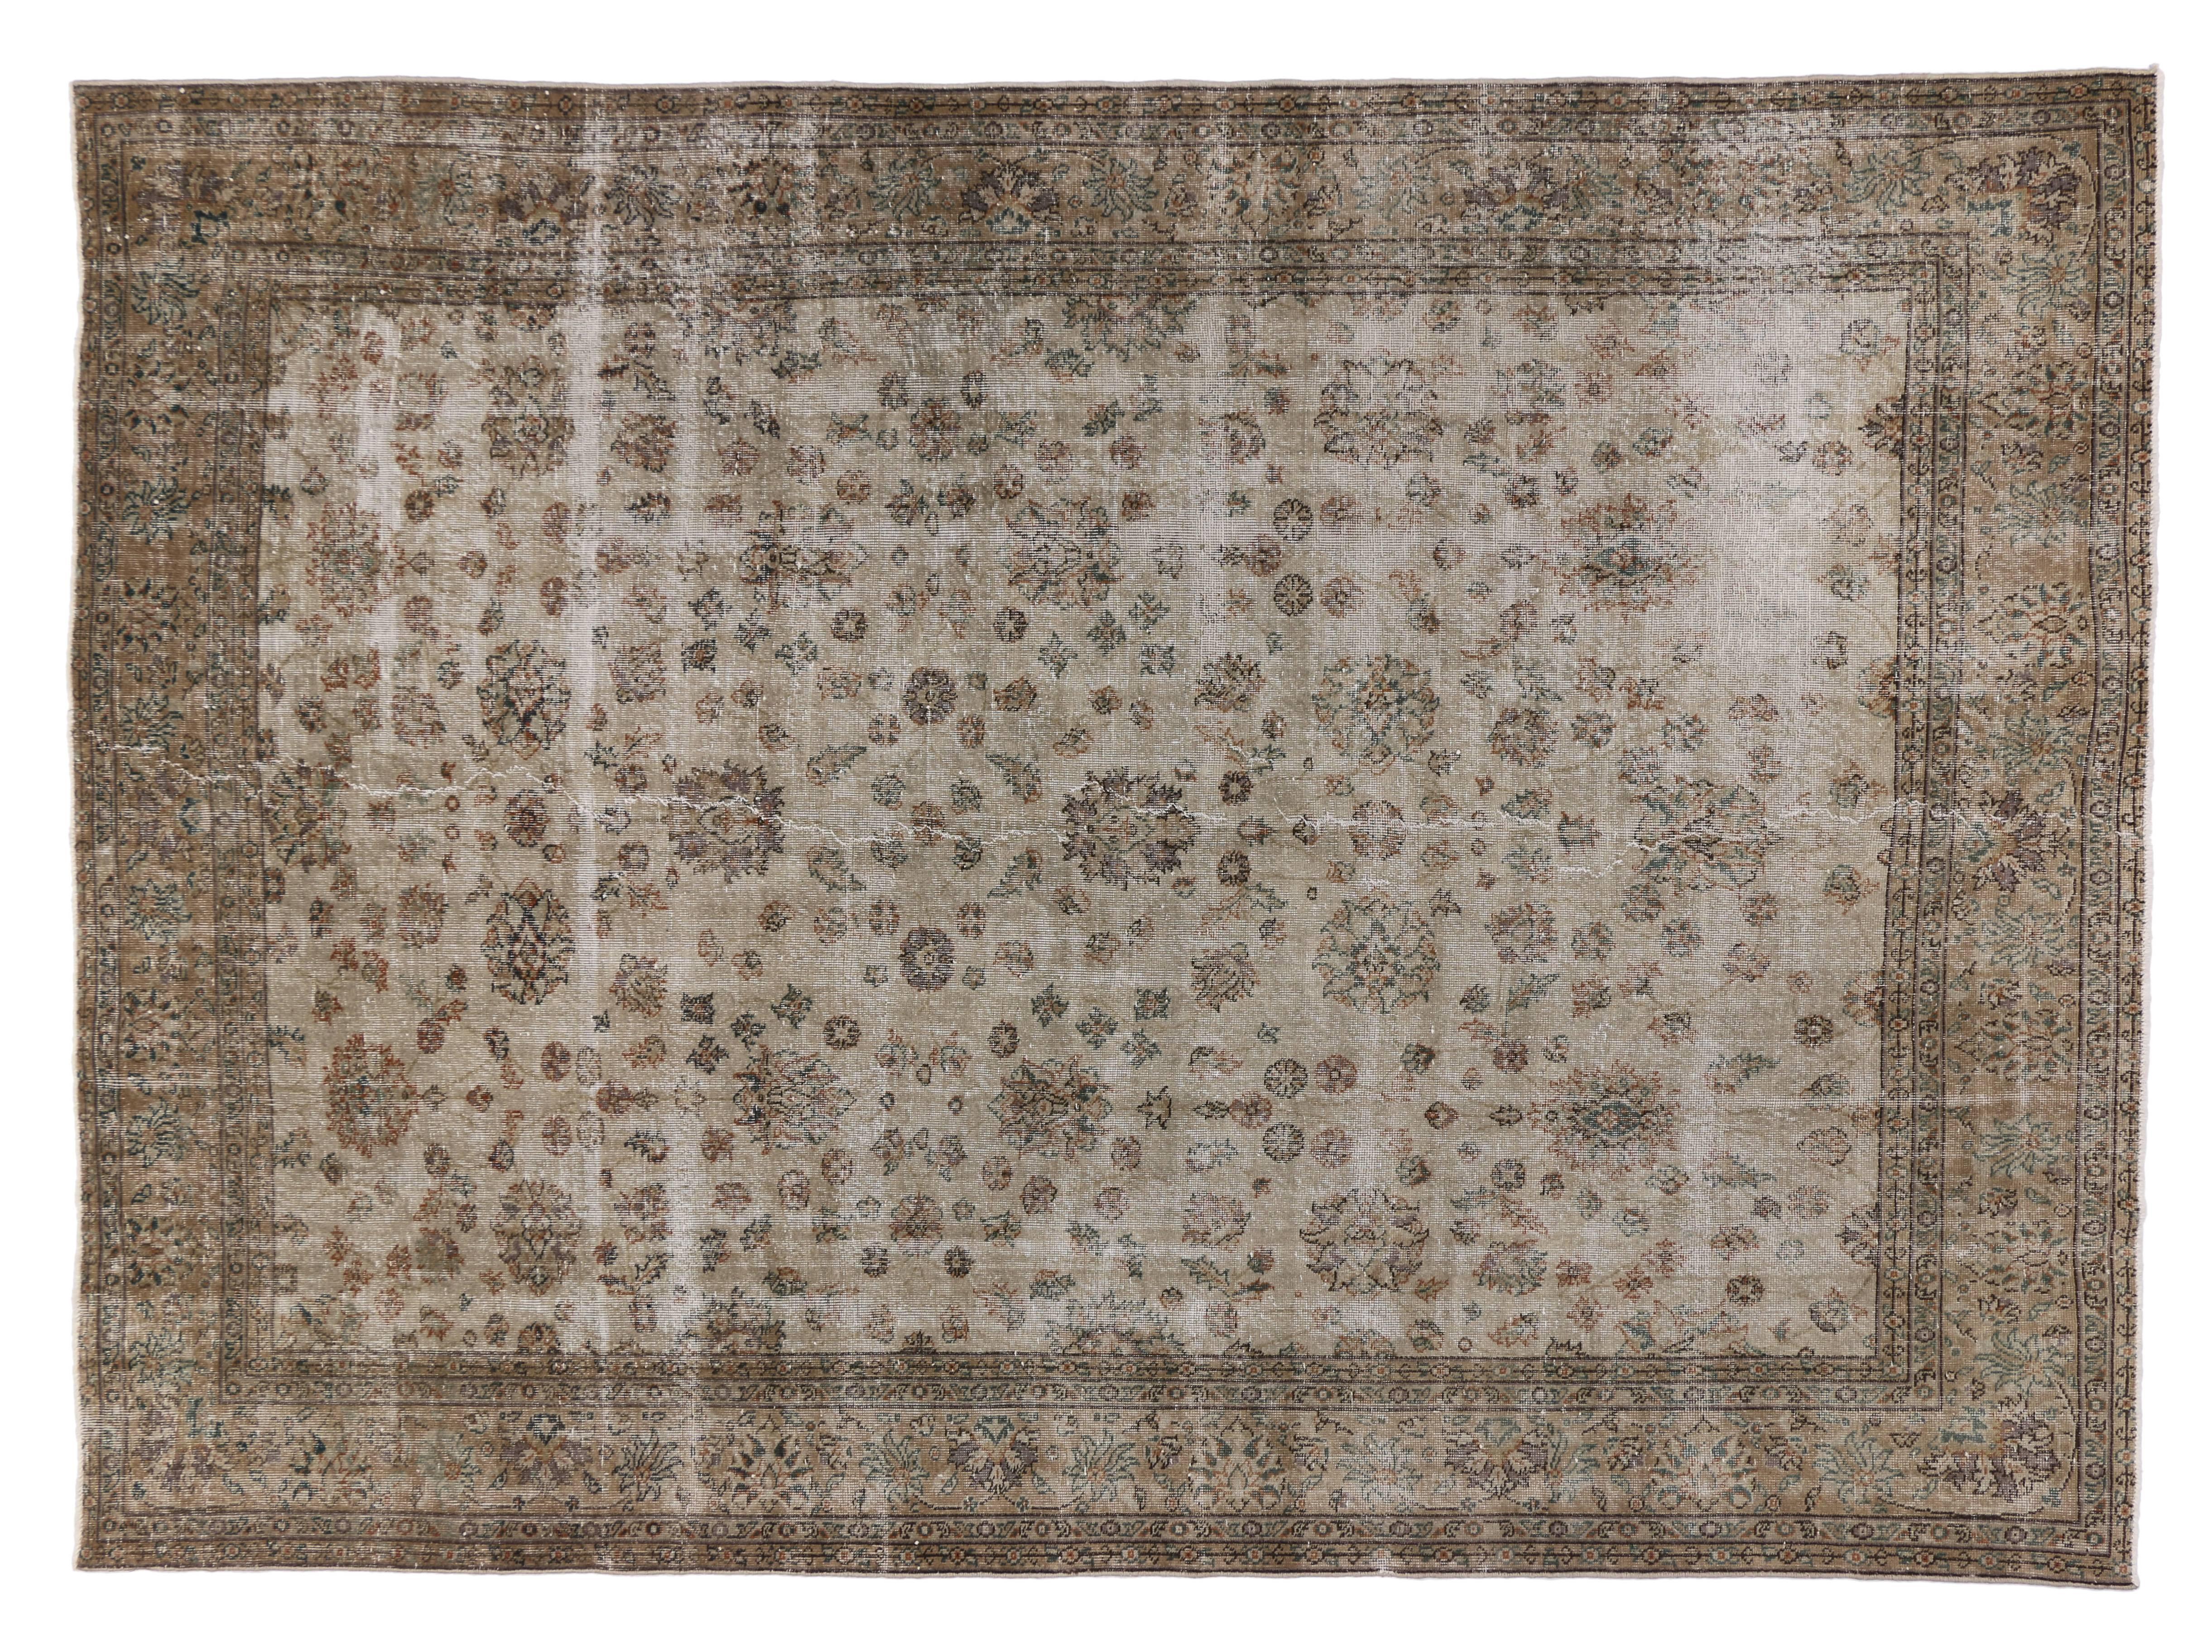 Hand-Knotted Distressed Sivas Rug with Shabby Chic Farmhouse Style